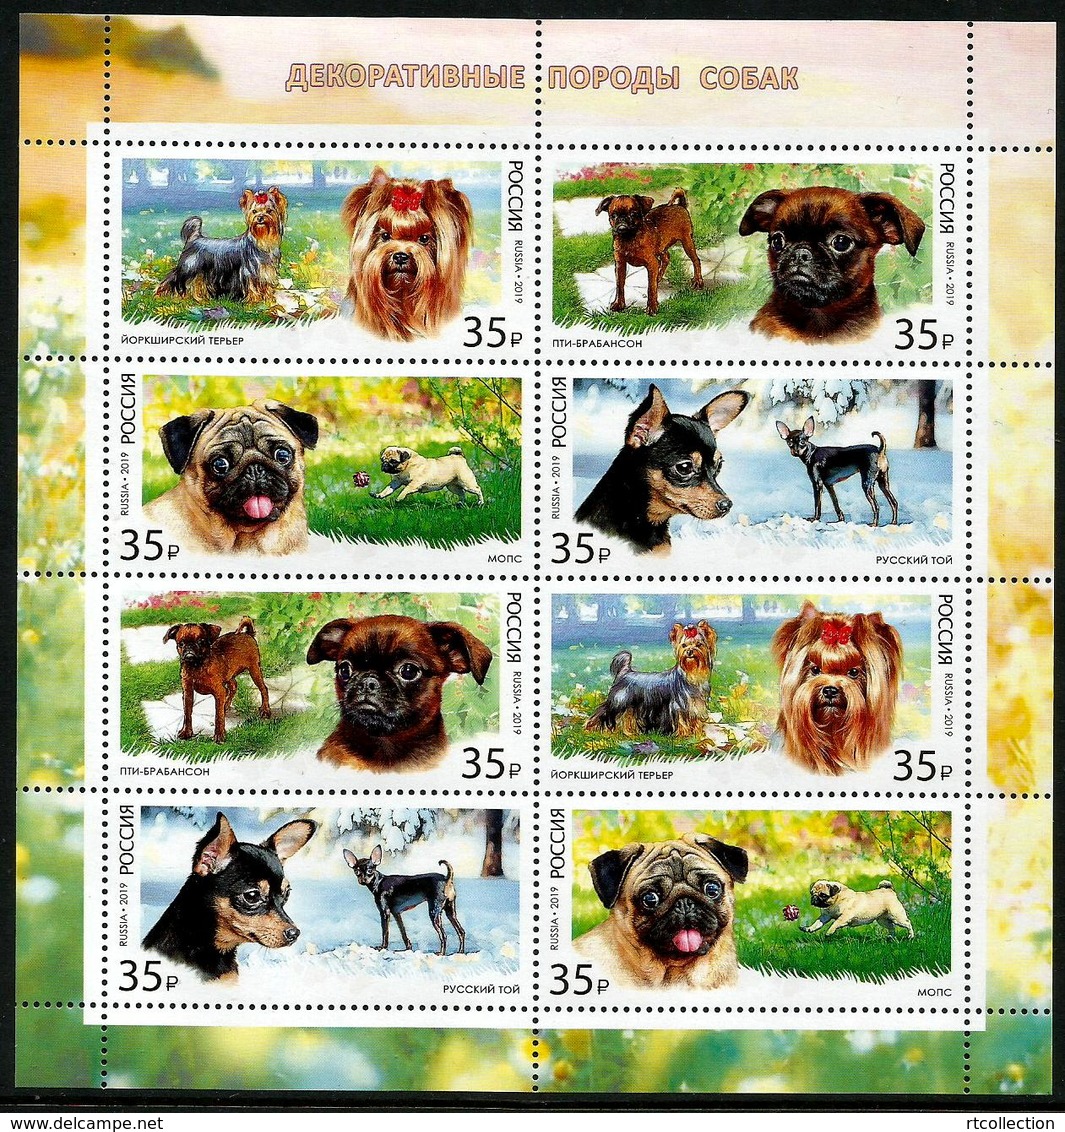 Russia 2019 Sheet Decorative Toy Dogs Dog Animals Fauna Mammals Nature Animal Mammal Stamps MNH - Hojas Completas